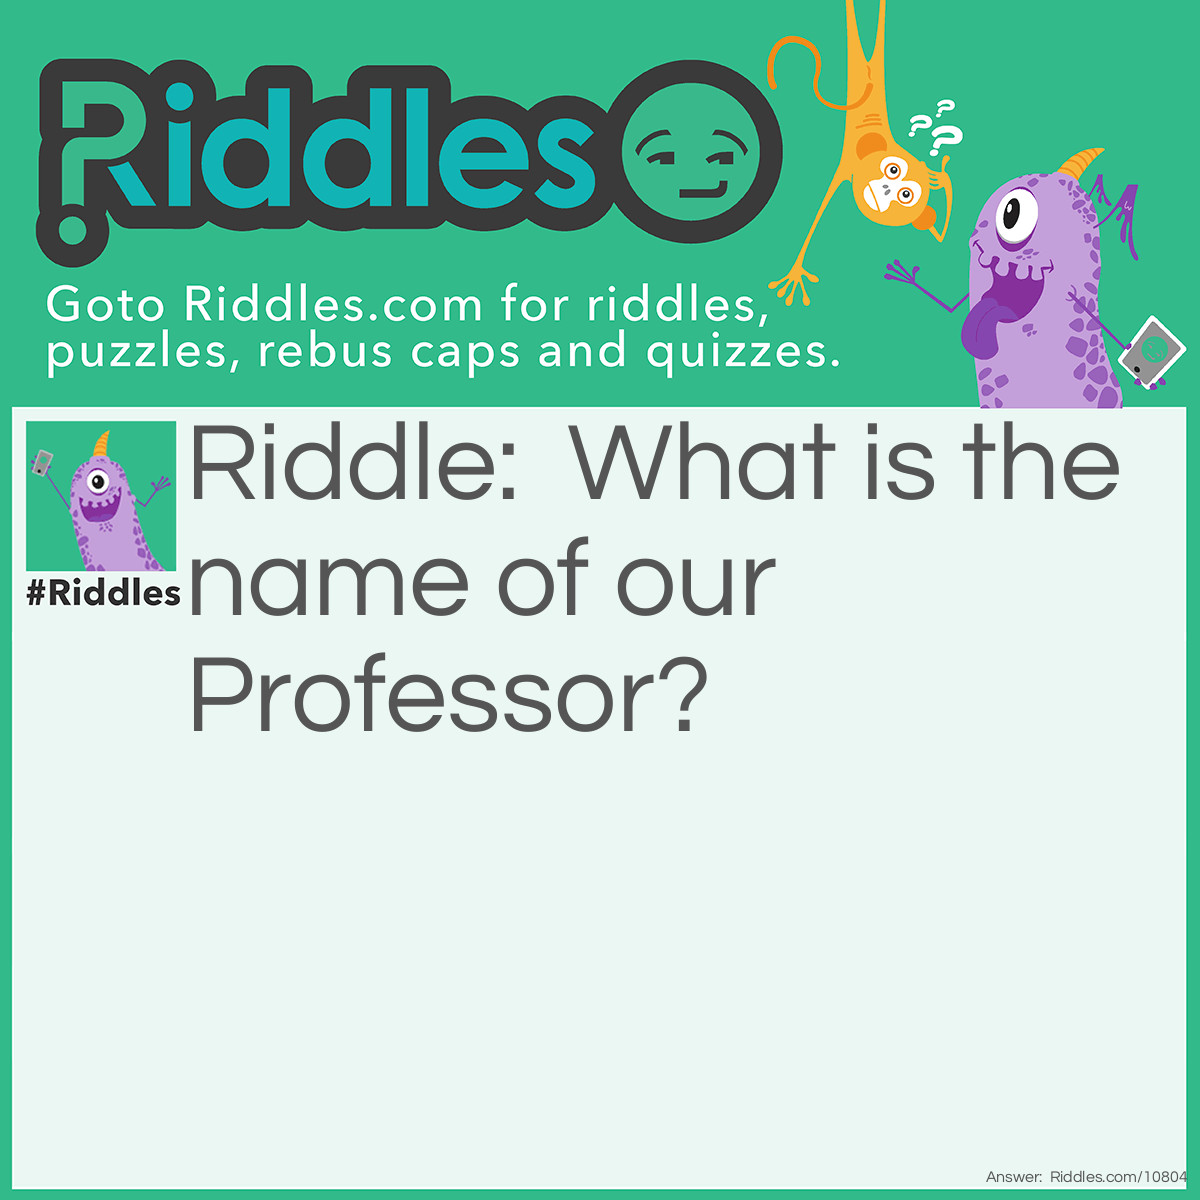 Riddle: What is the name of our Professor? Answer: Seyy Sode.